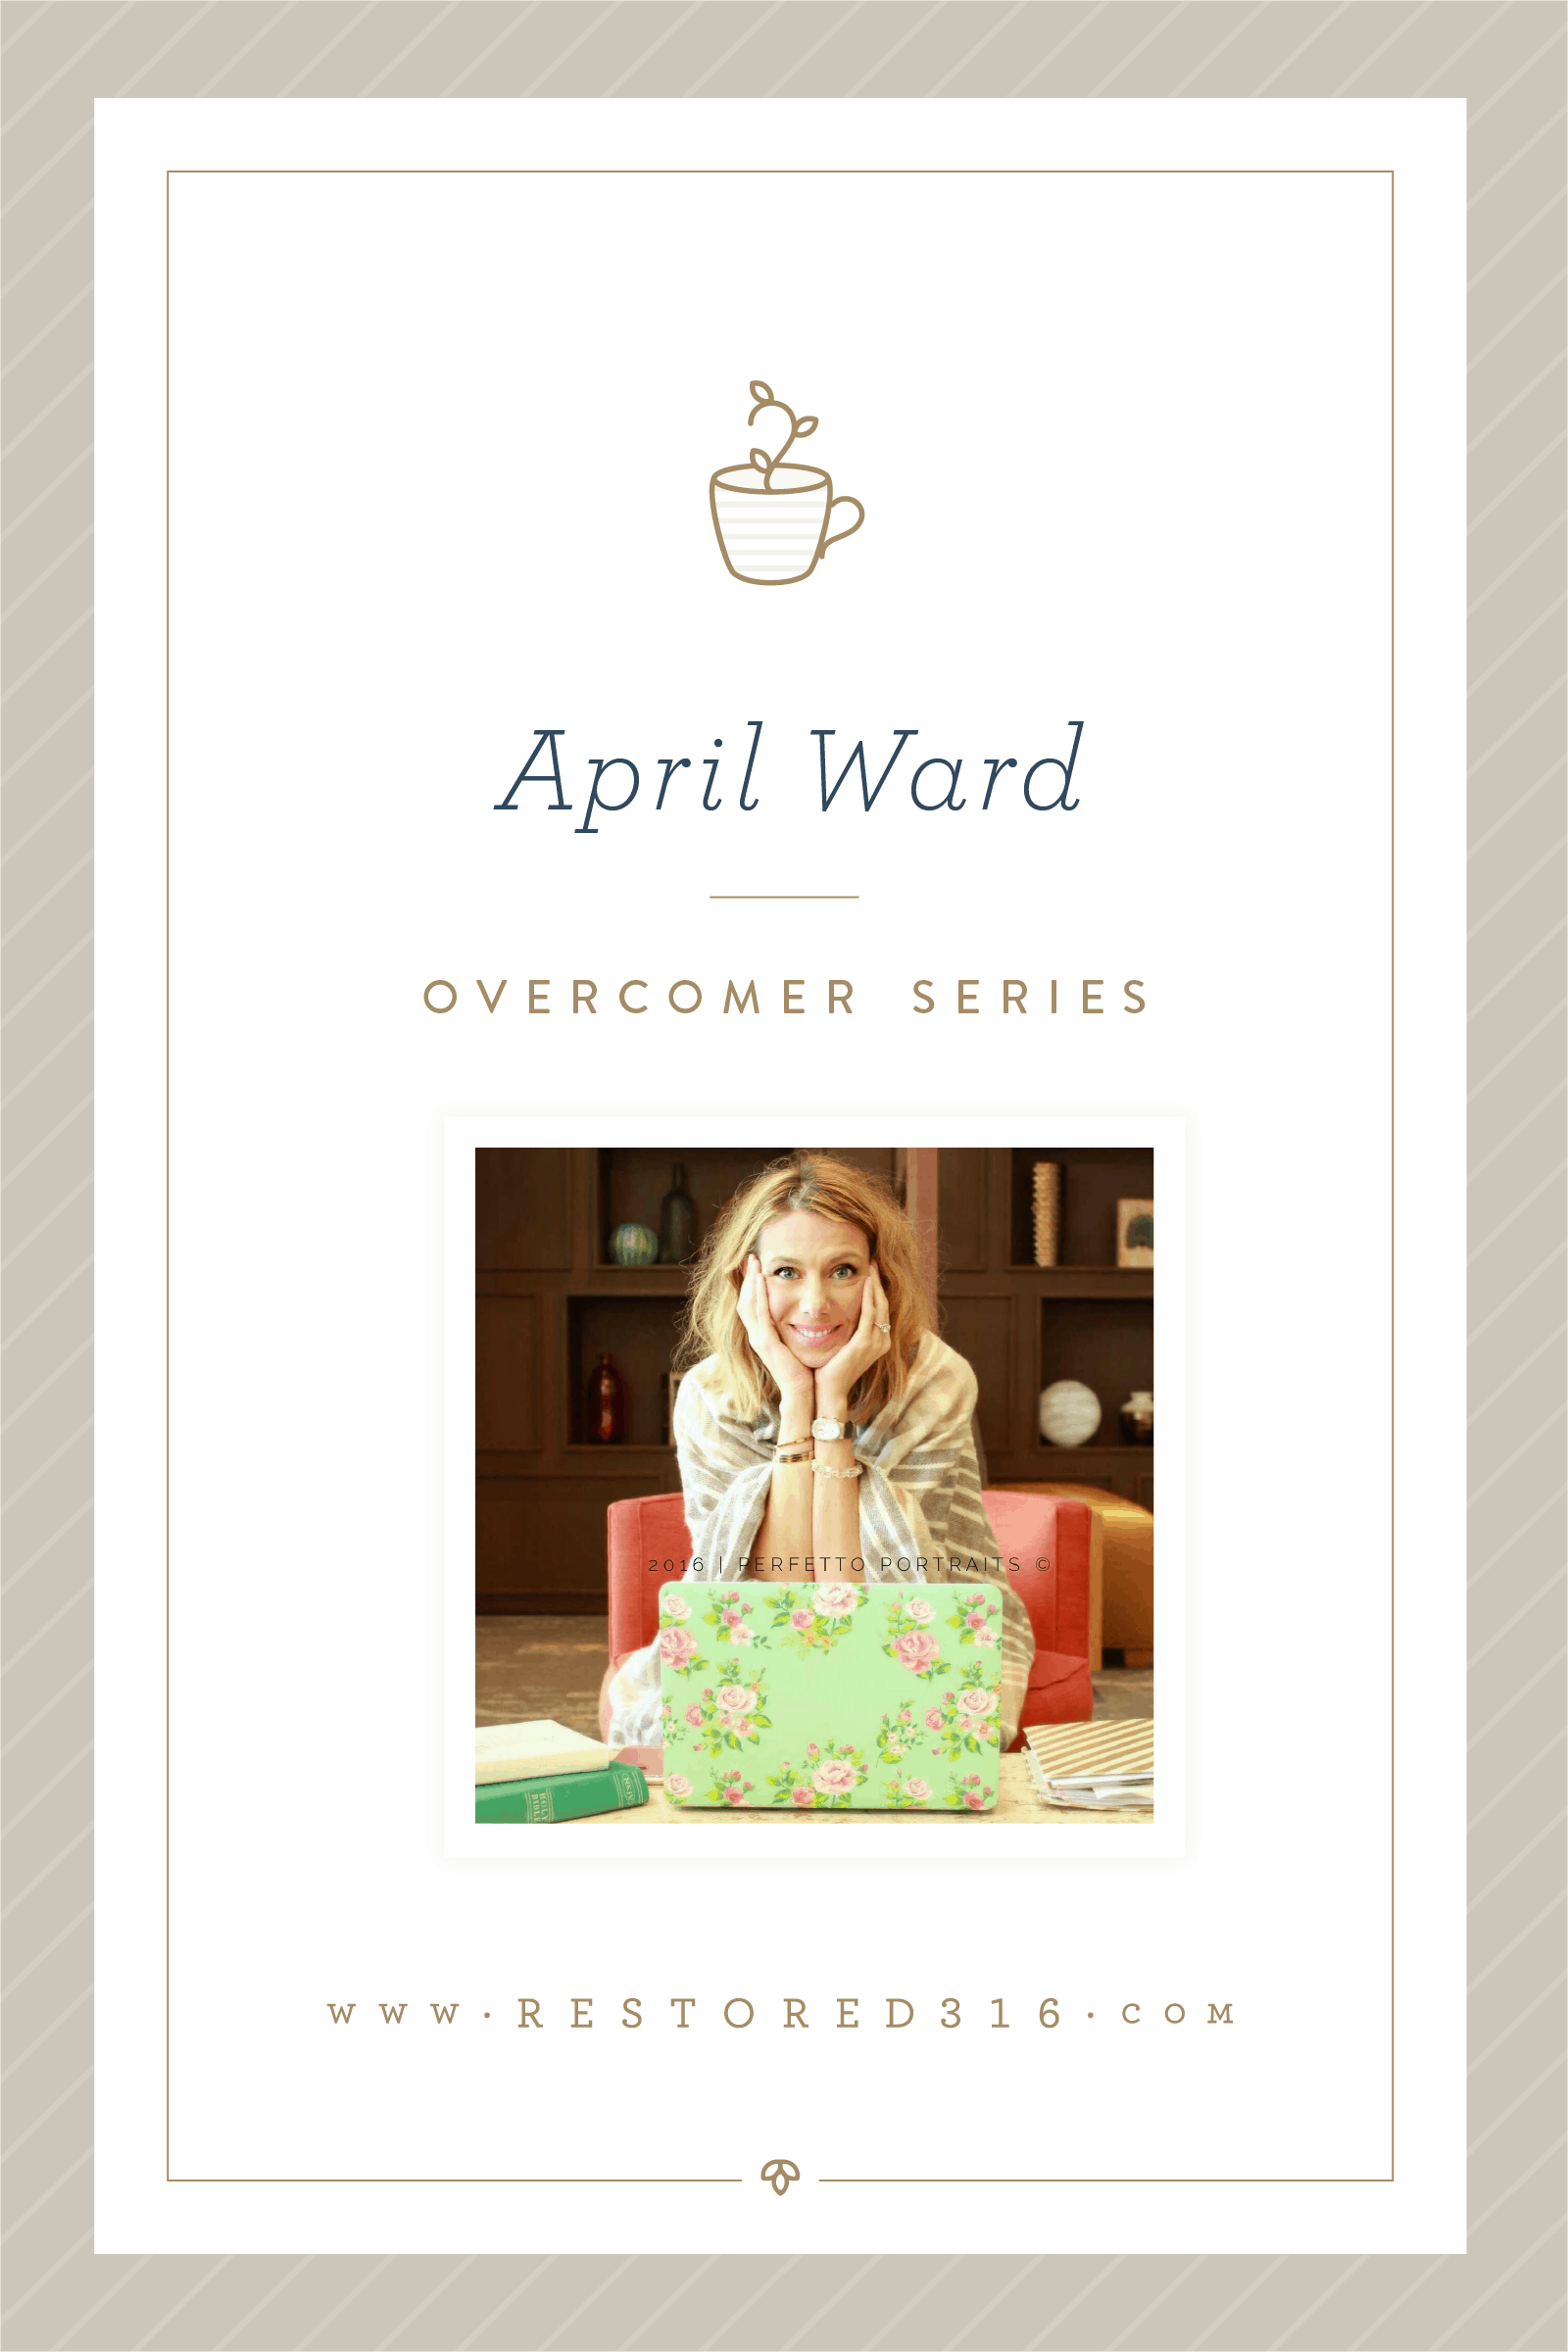 Overcomer Series with April Ward